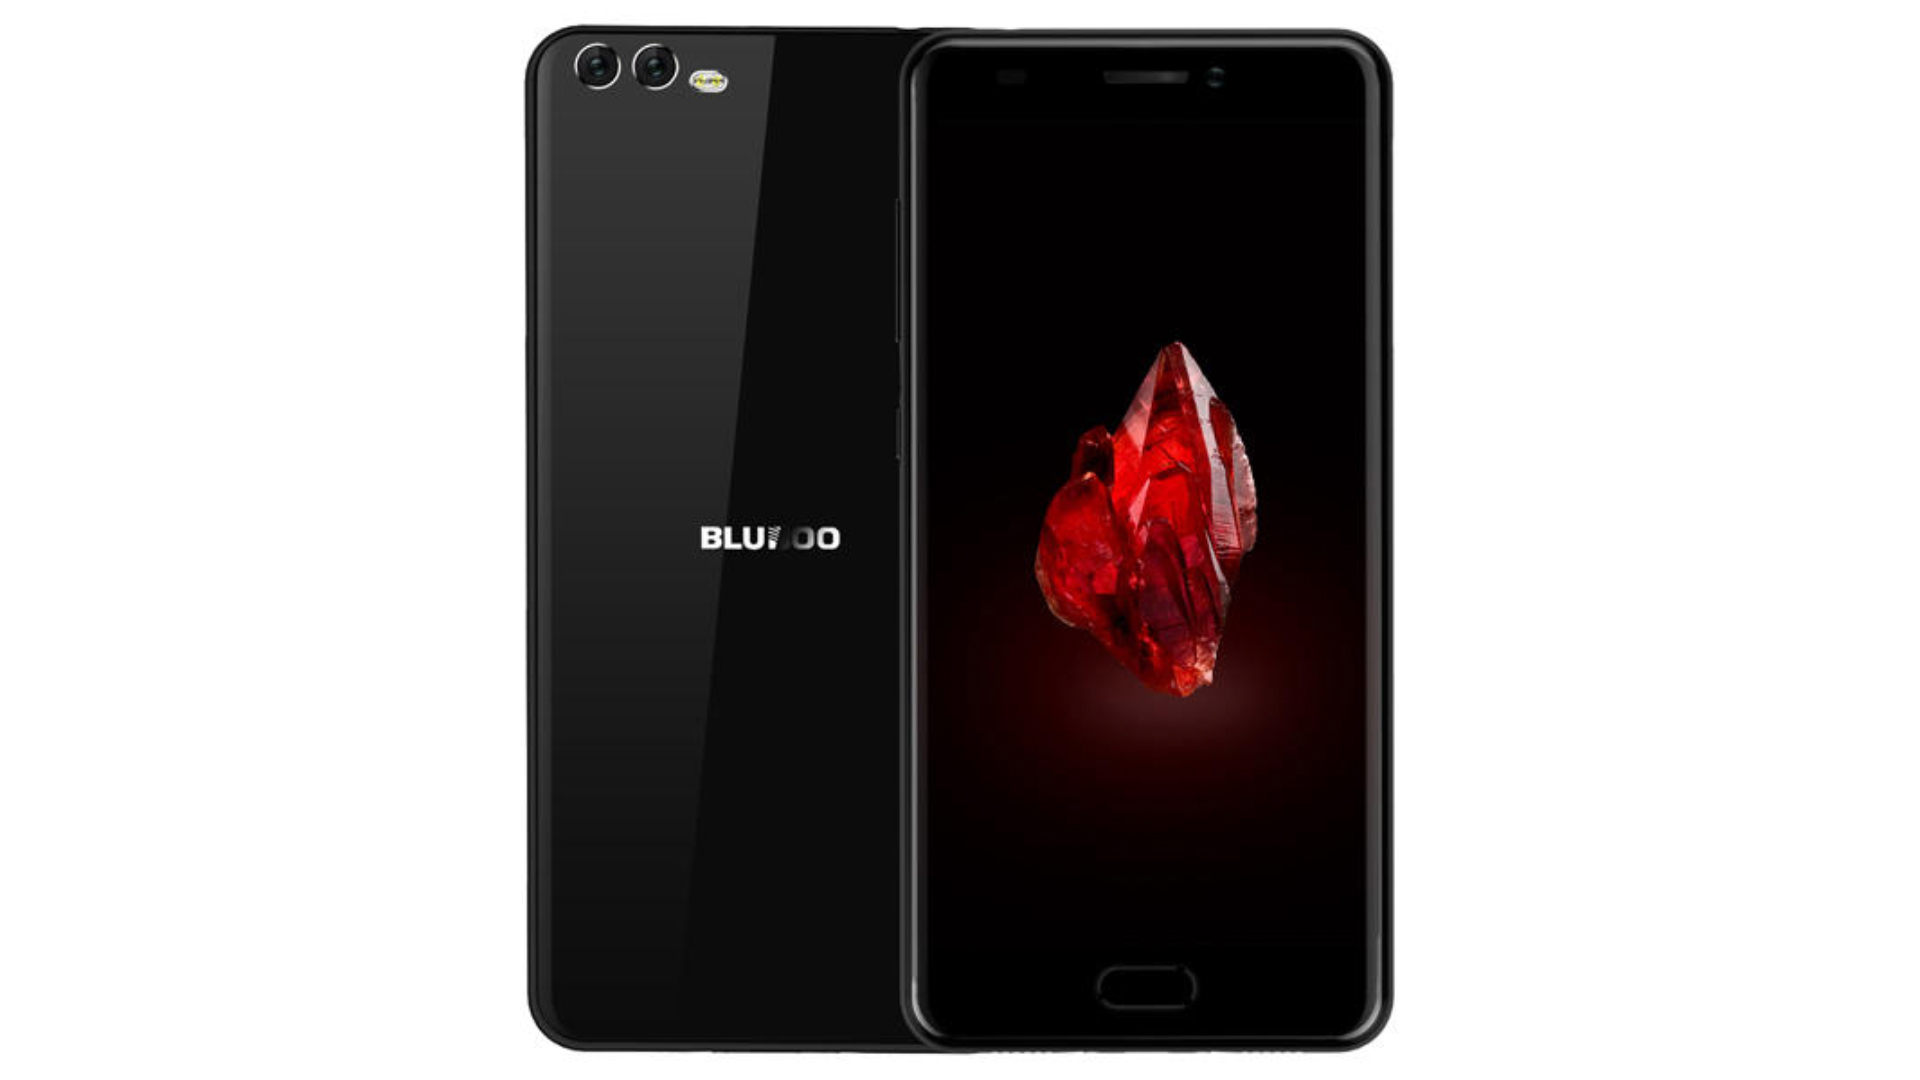 Root and Install TWRP Recovery on Bluboo D2, How to Root Bluboo D2, Install TWRP Recovery on Bluboo D2, Root Bluboo D2 Using supersu